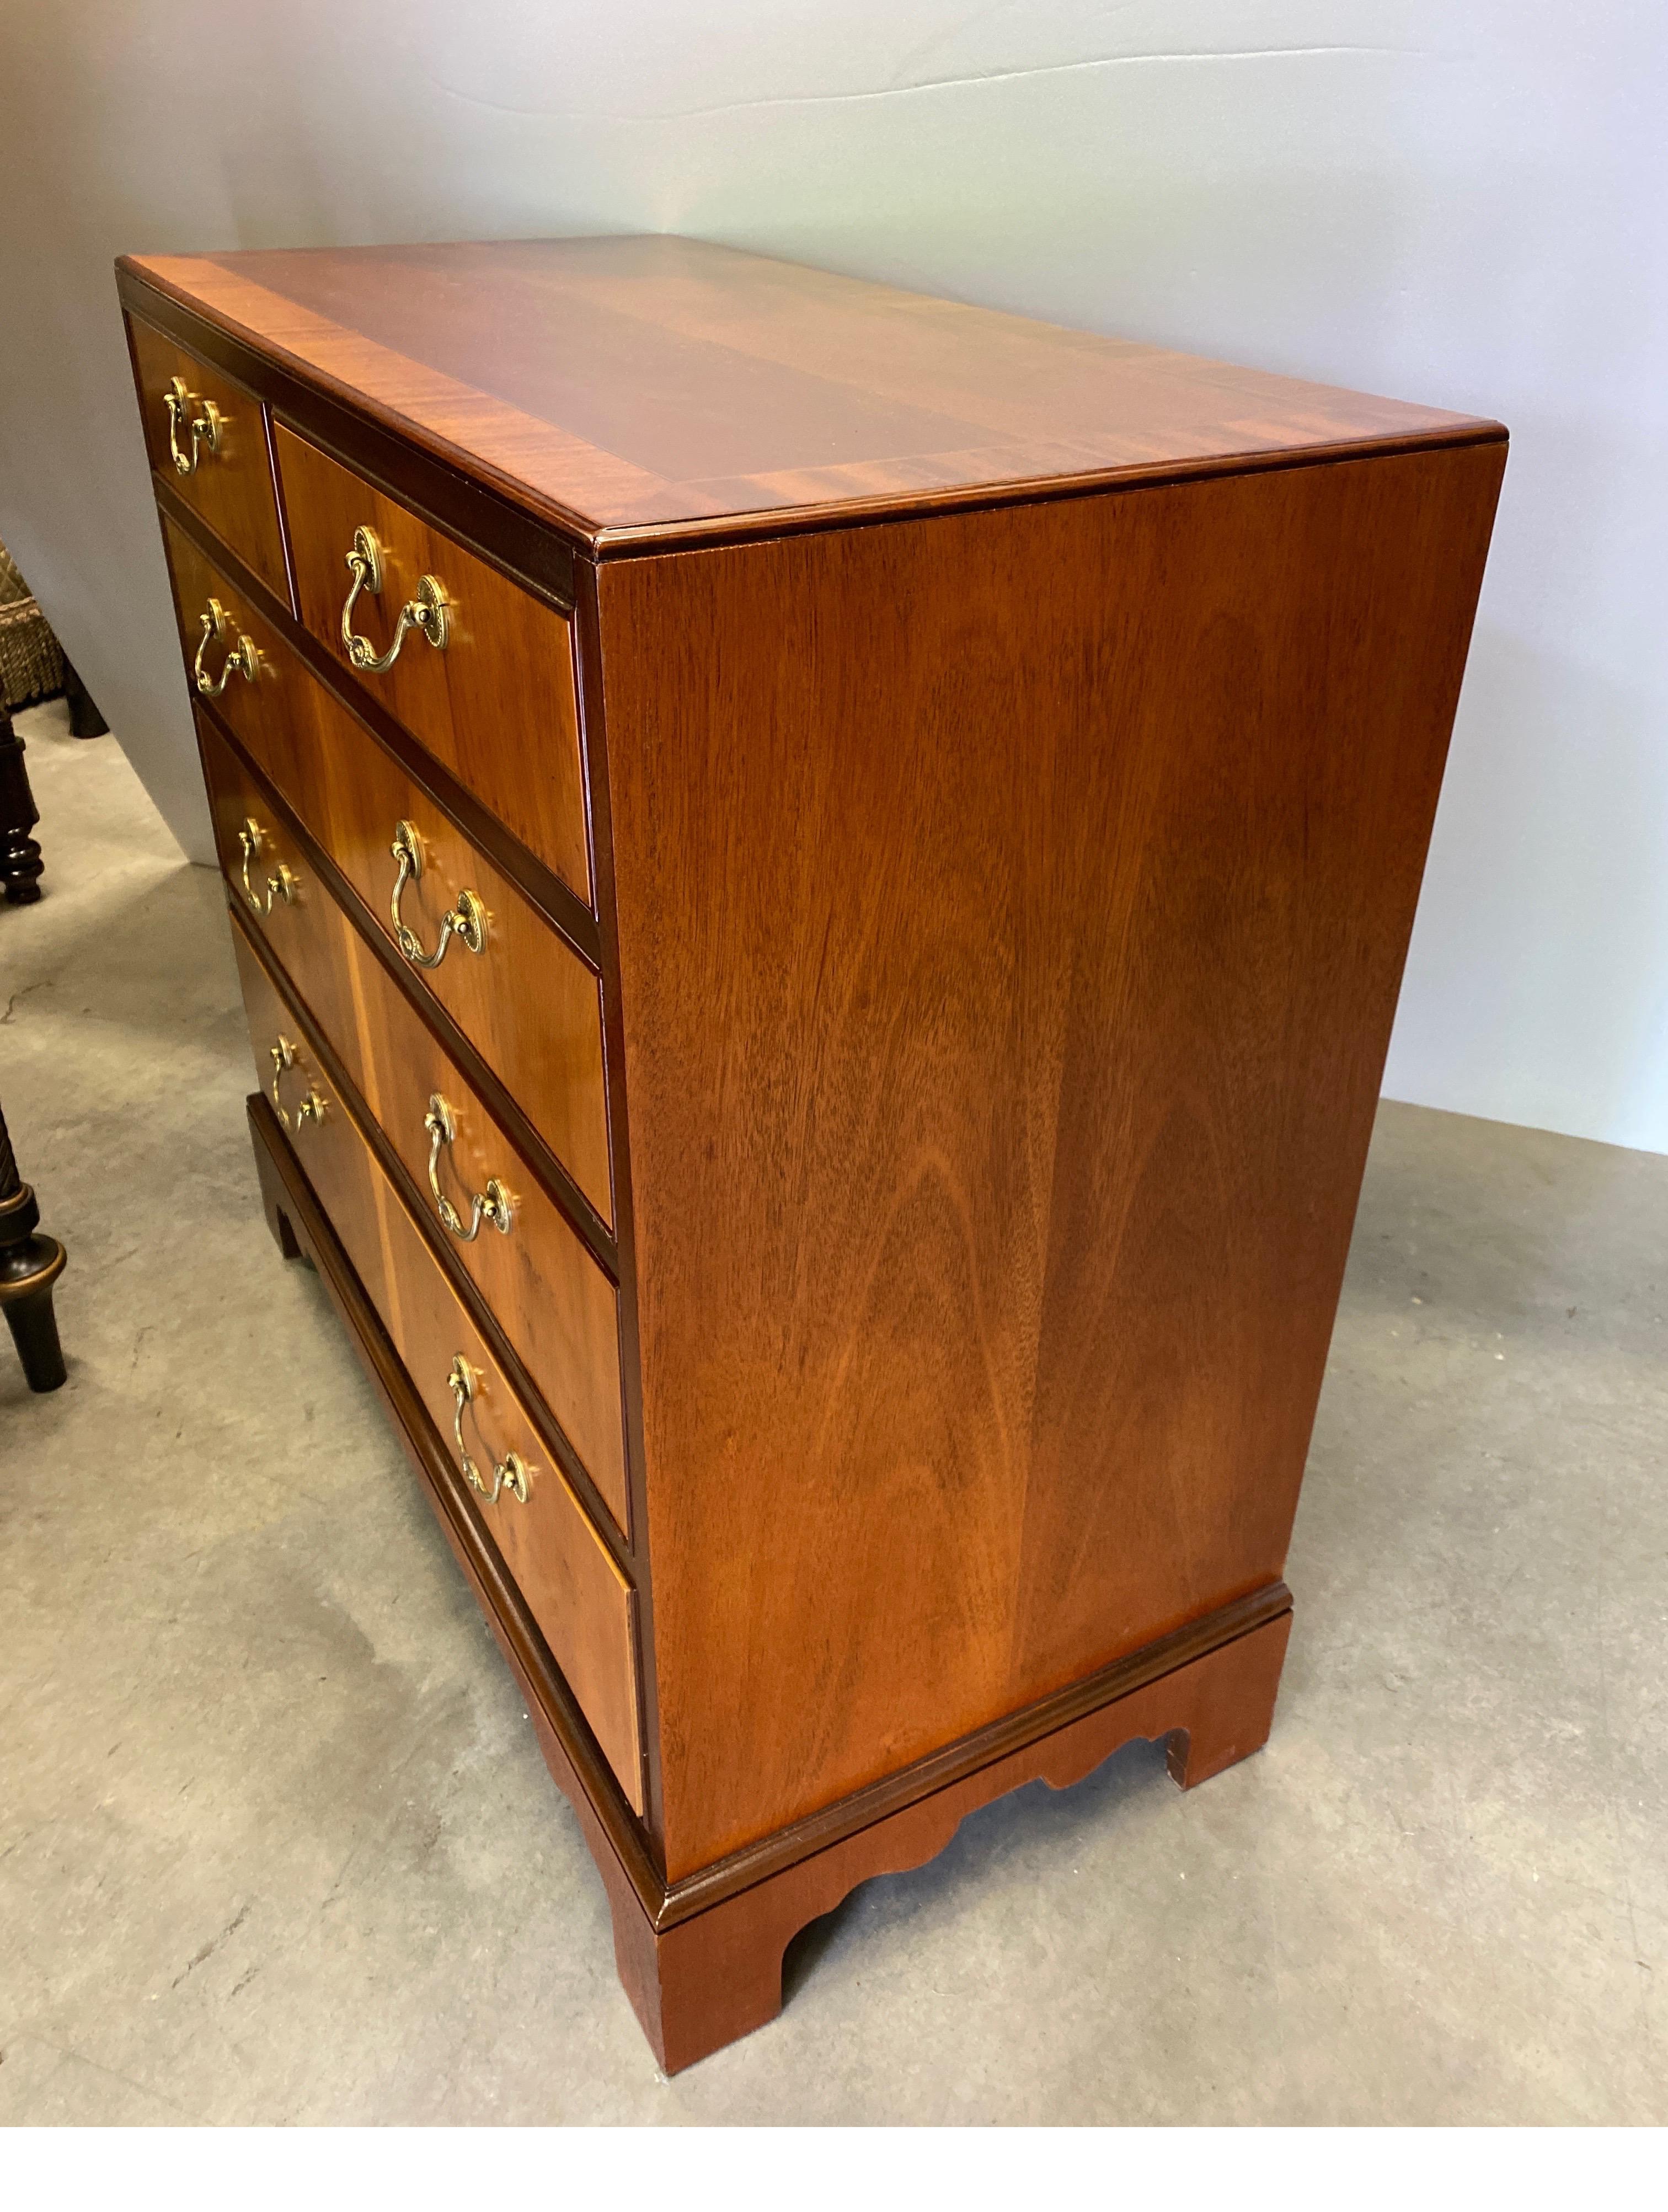 20th Century Mahogany and Yew Wood Bachelors Chest by Baker Furniture